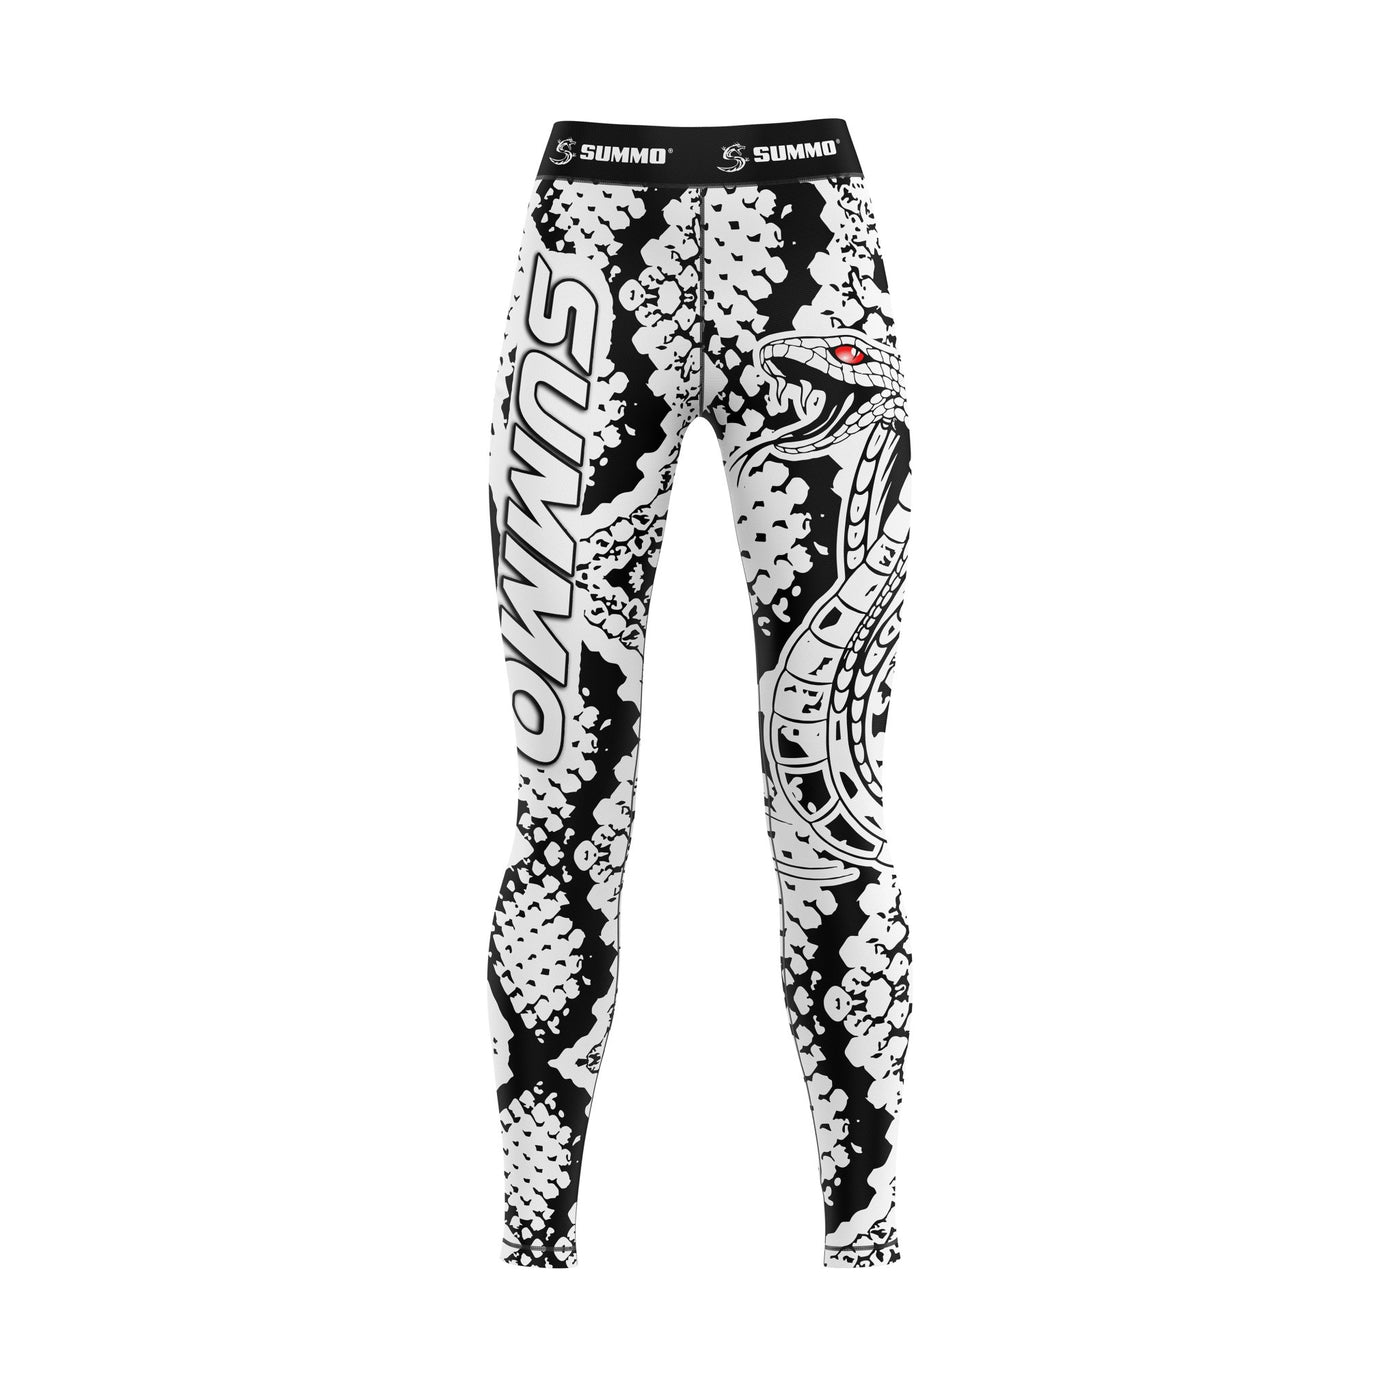 Cobrascope Compression Pants for Men/Women - Summo Sports